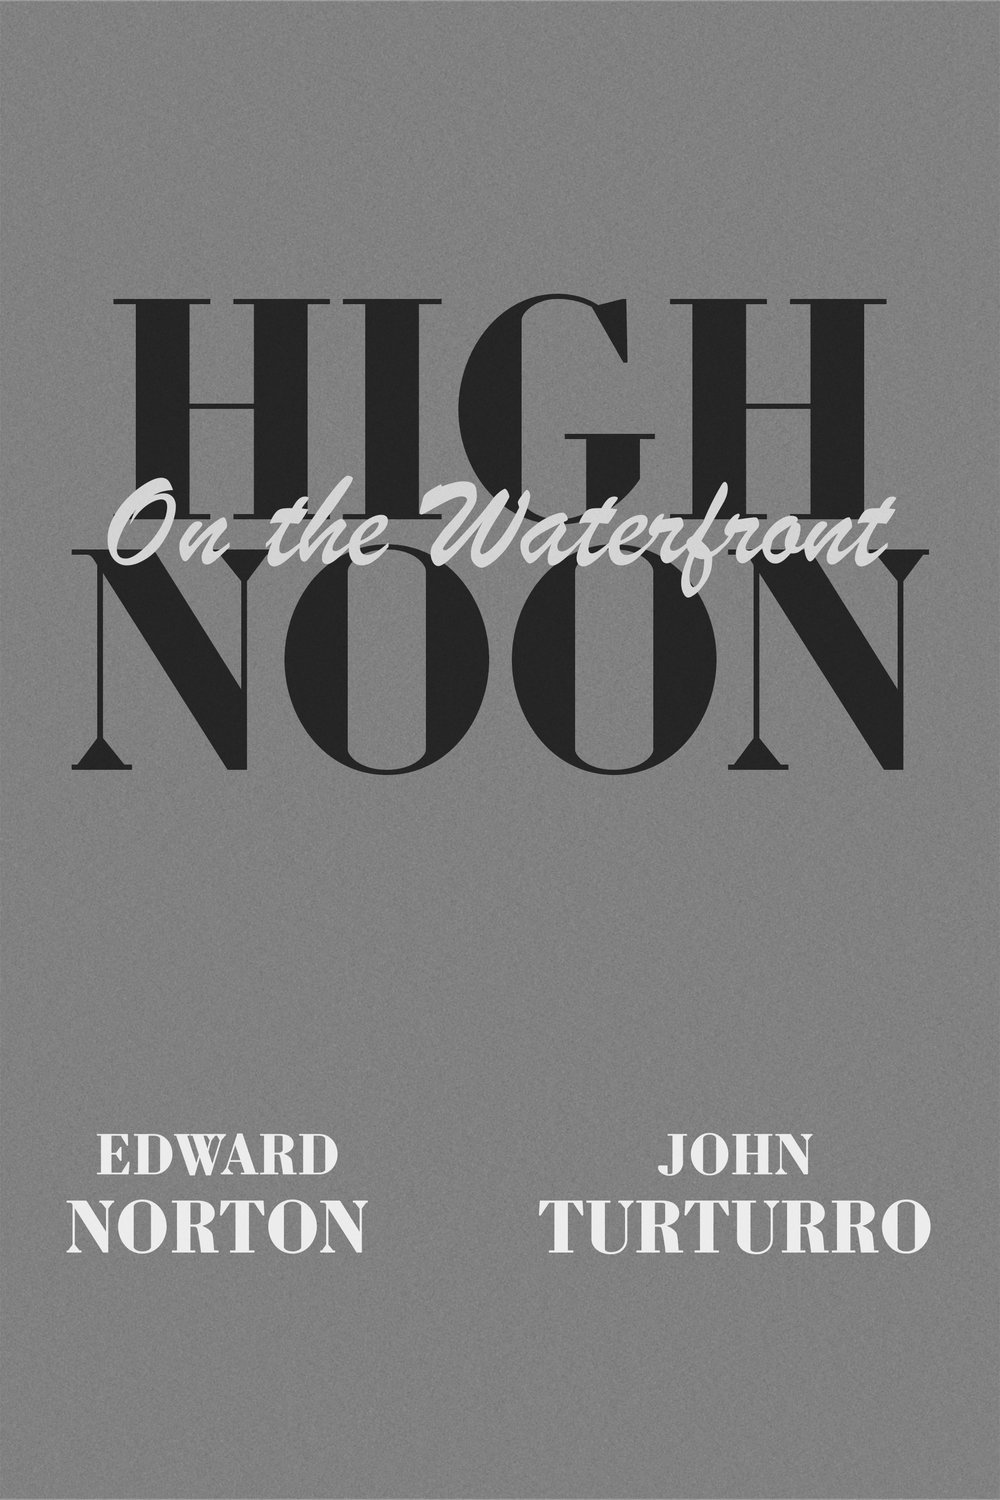 Poster of the movie High Noon on the Waterfront